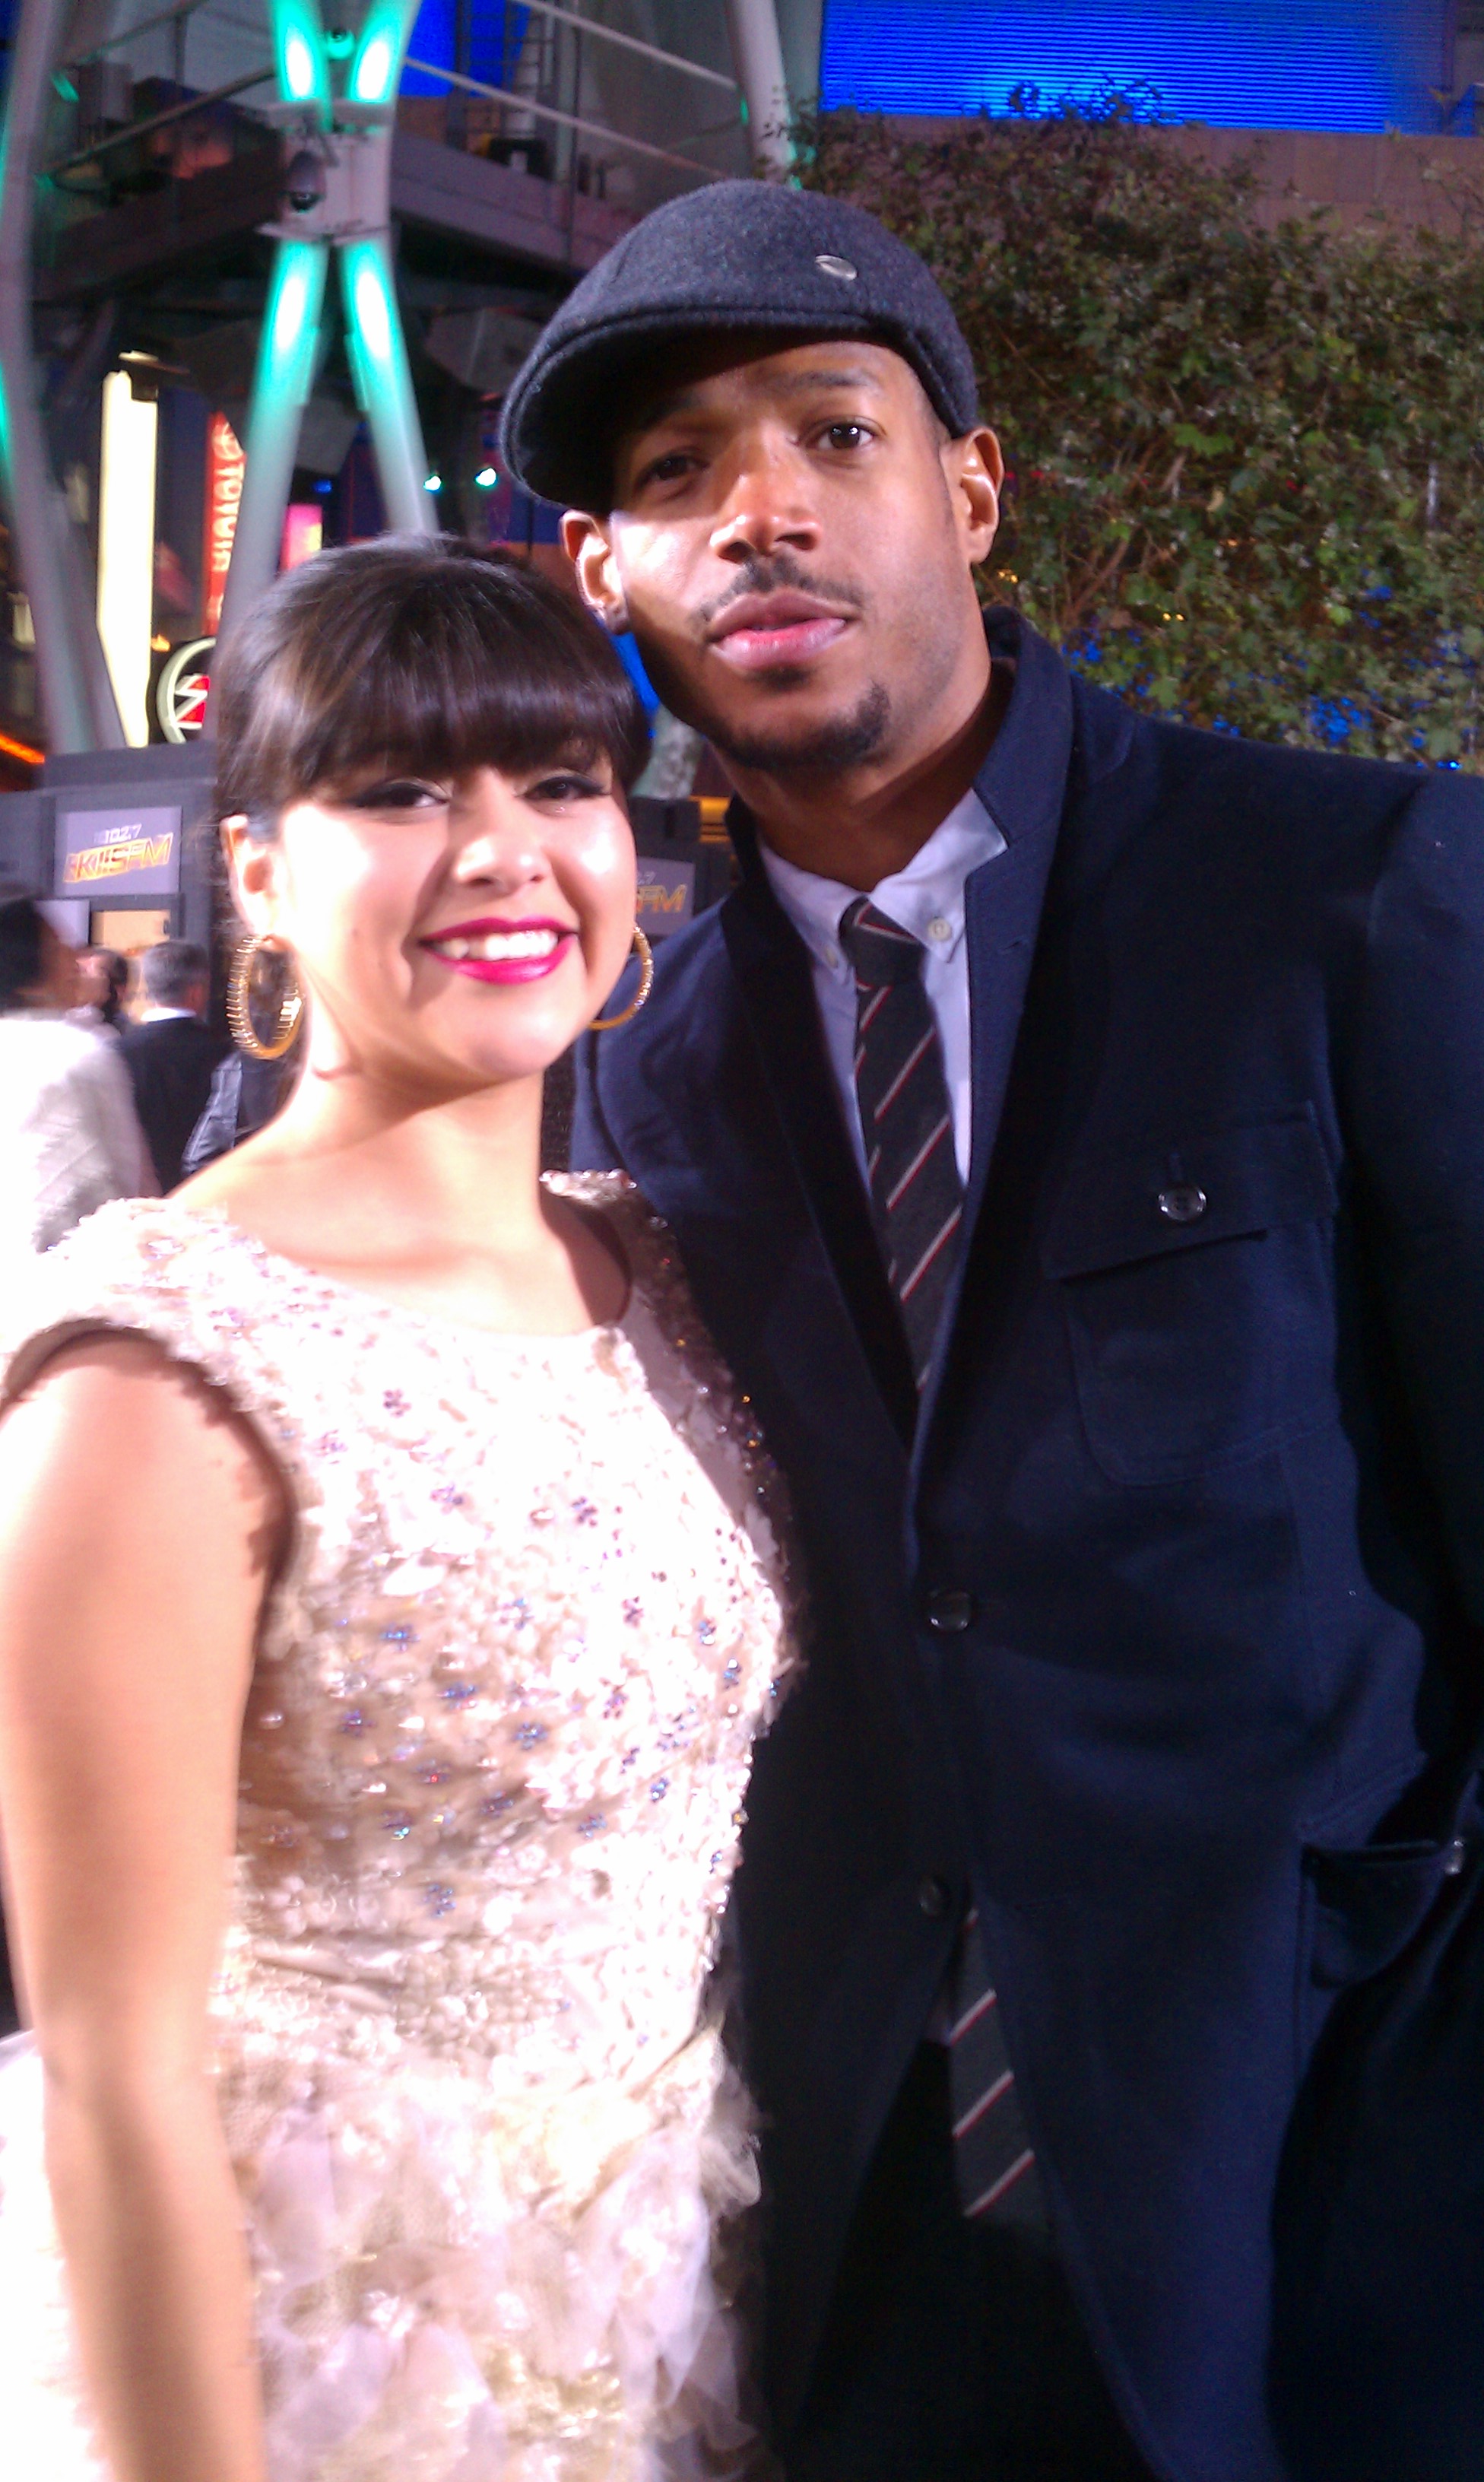 Chelsea and Marlon Wayans at the Breaking Dawn premiere